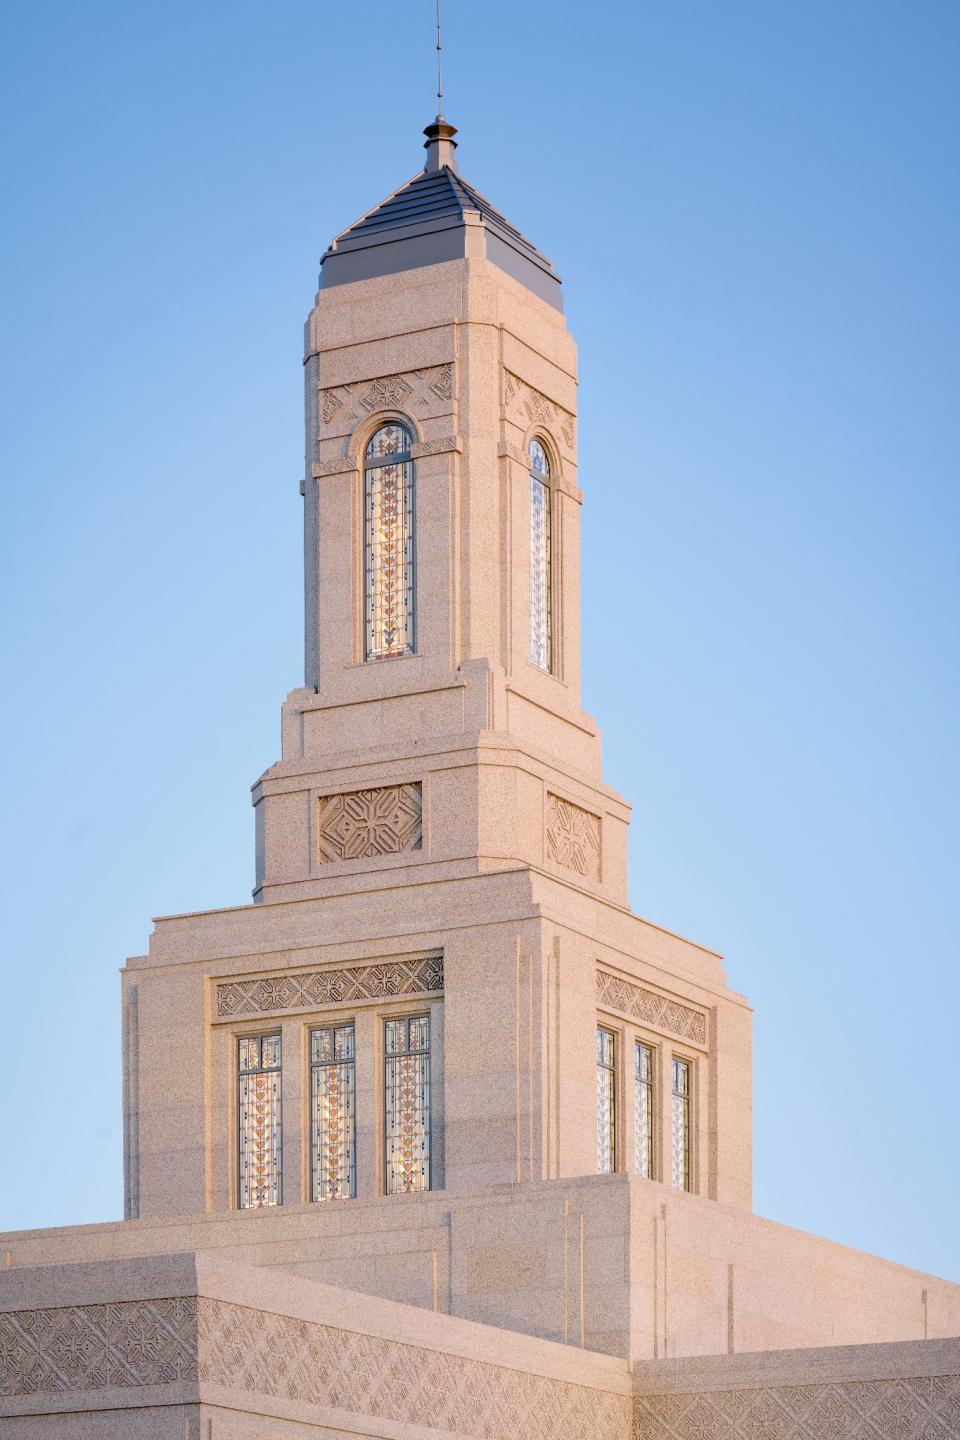 The spire of the Helena Montana Temple.